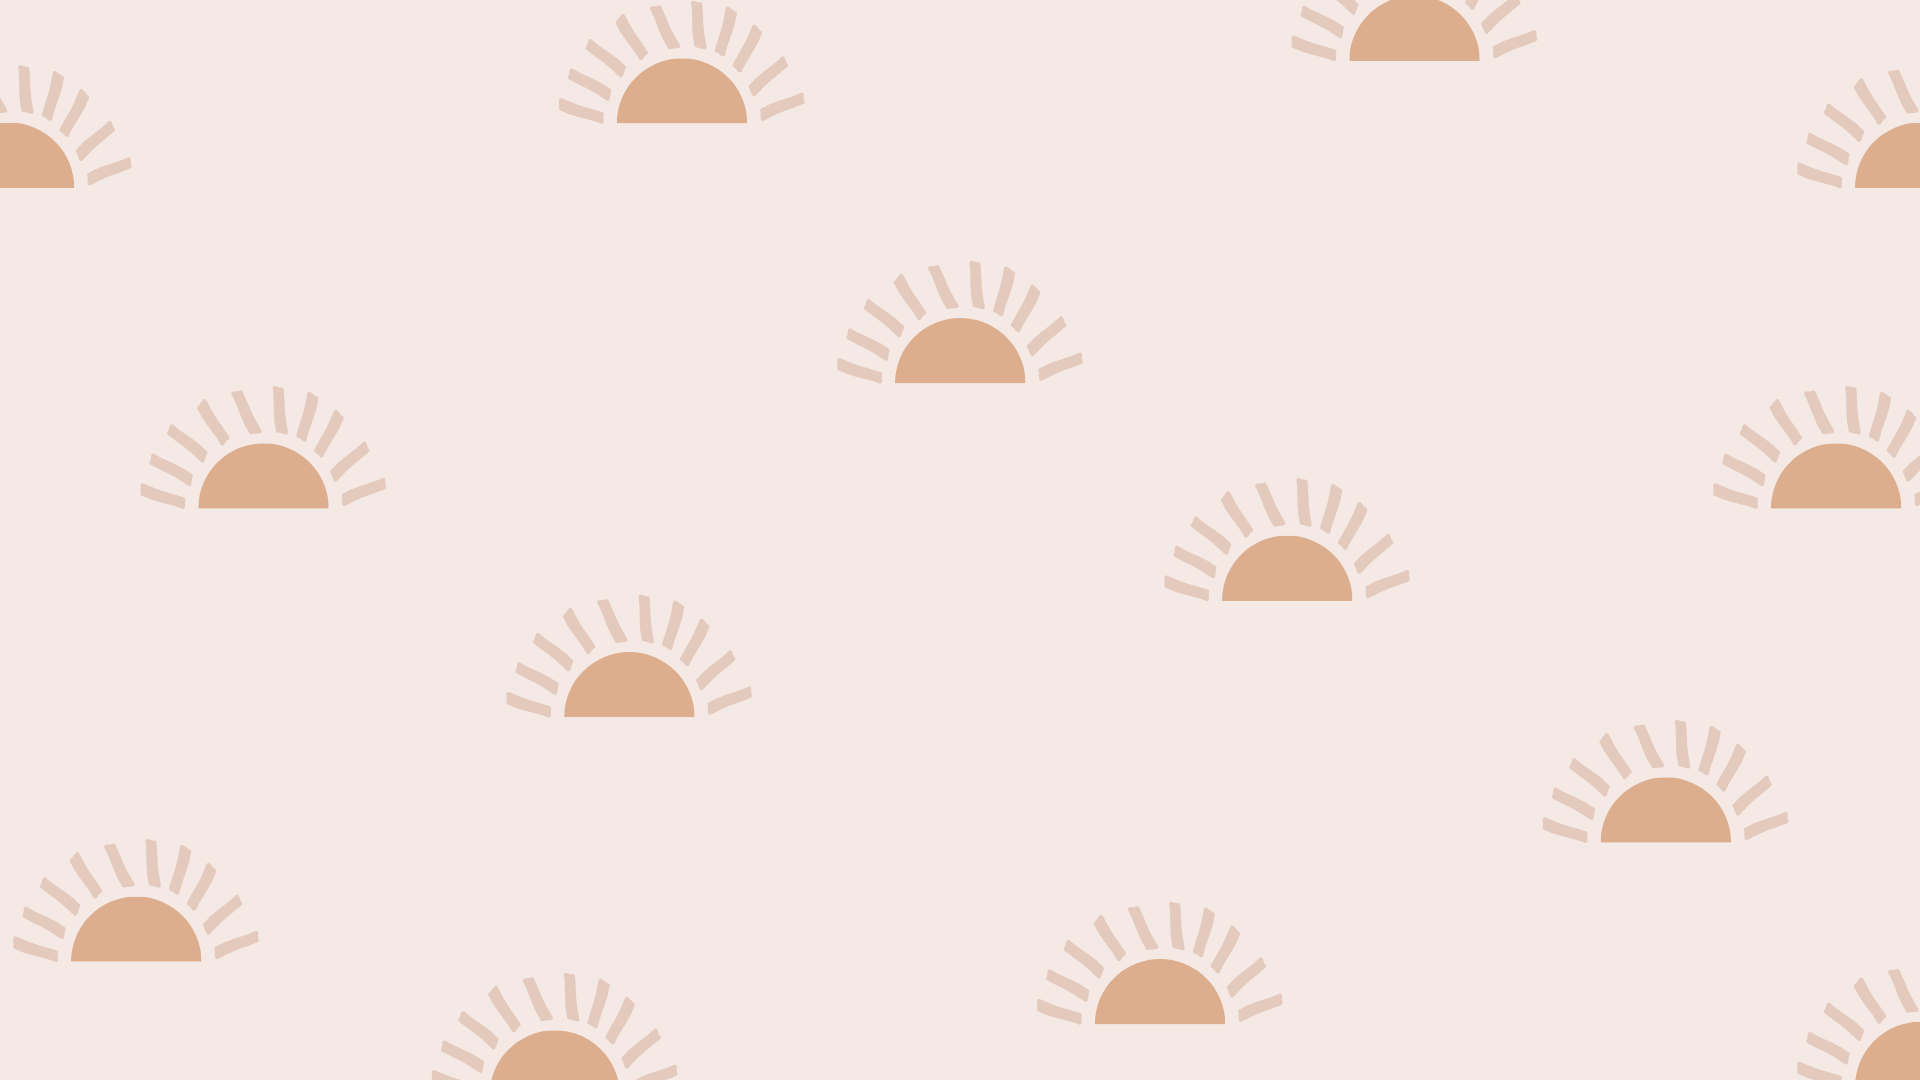 A cute and simple boho sun pattern in pink and beige tones, perfect for adding a touch of warmth and playfulness to any surface. - Boho, sun